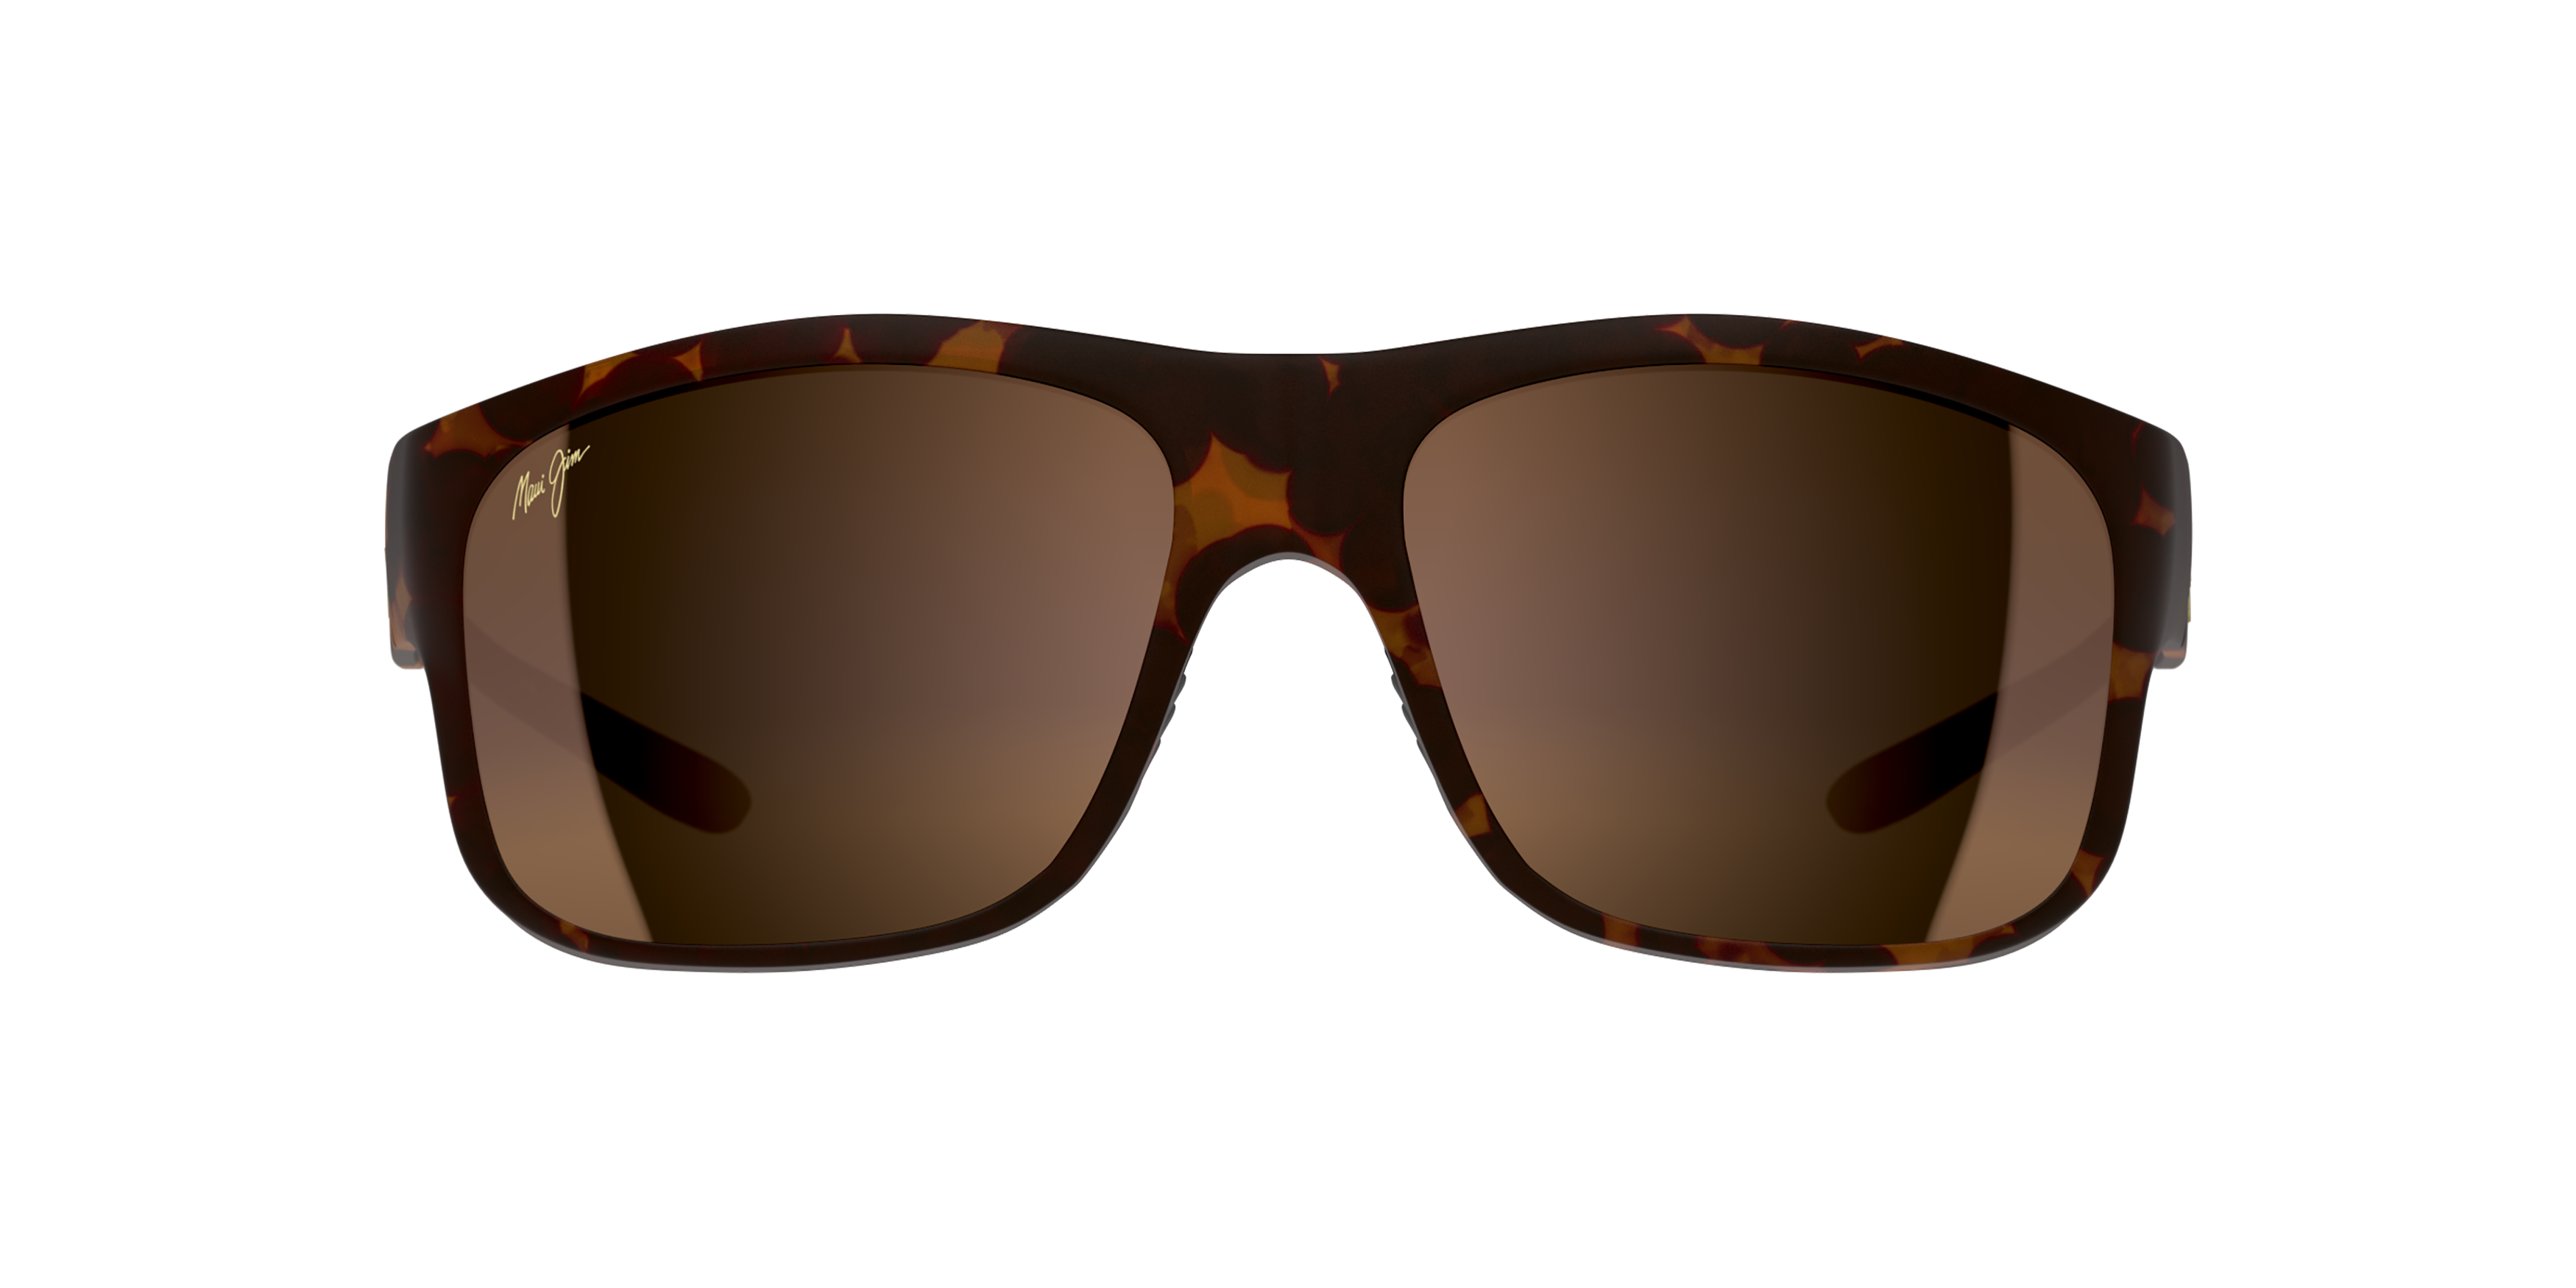 [products.image.front] MAUI JIM 815 Southern Cross 10MR